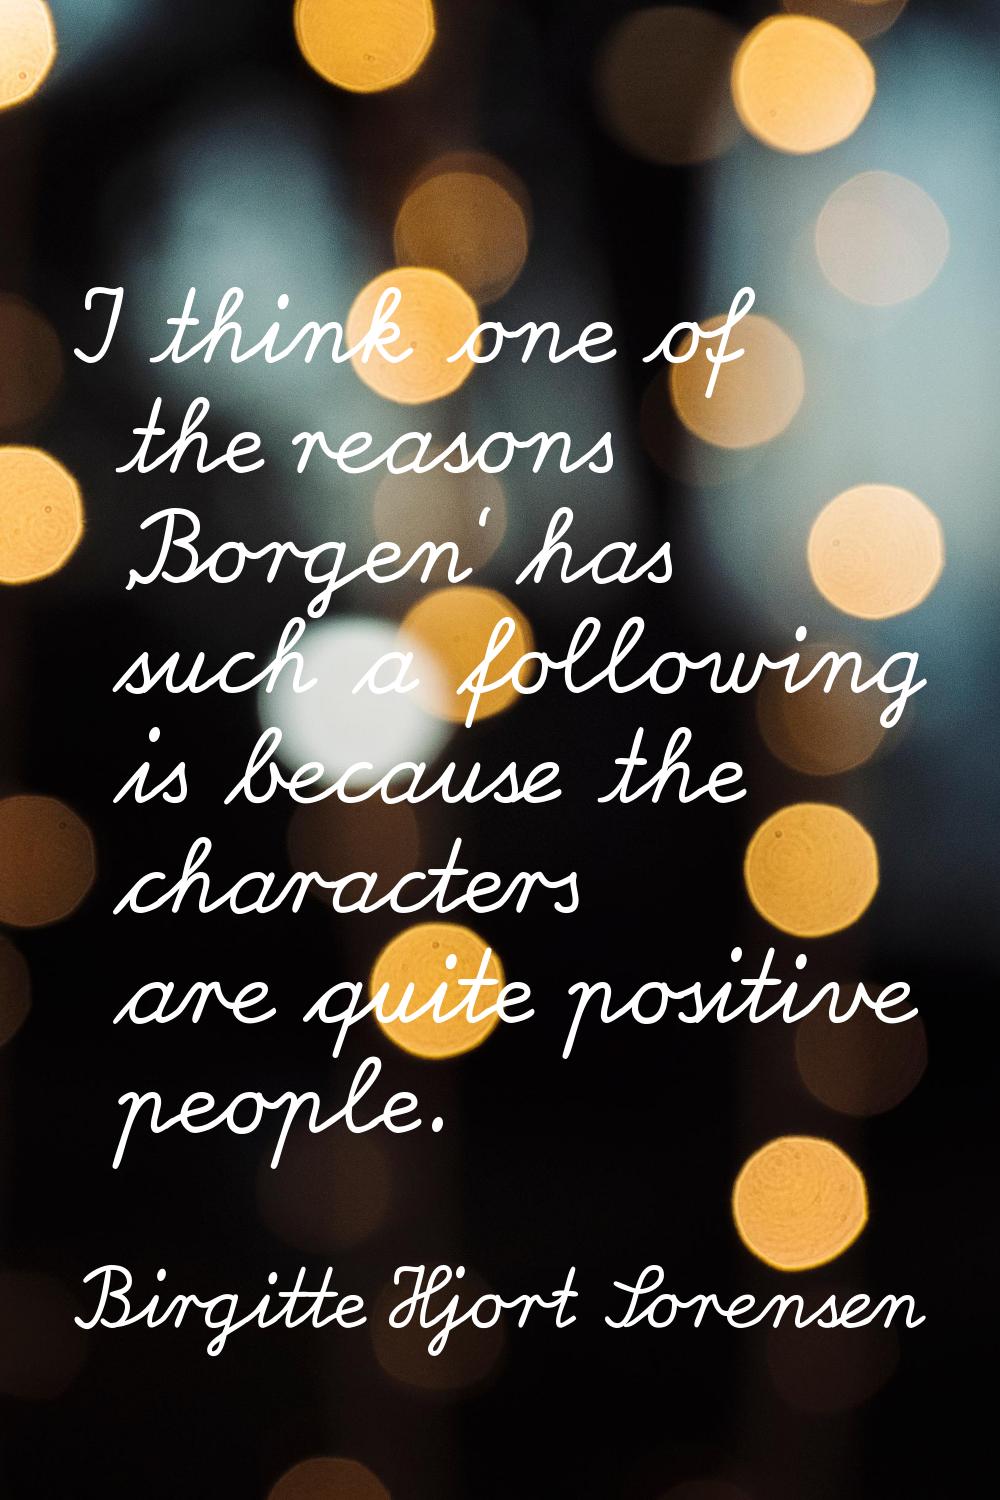 I think one of the reasons 'Borgen' has such a following is because the characters are quite positi